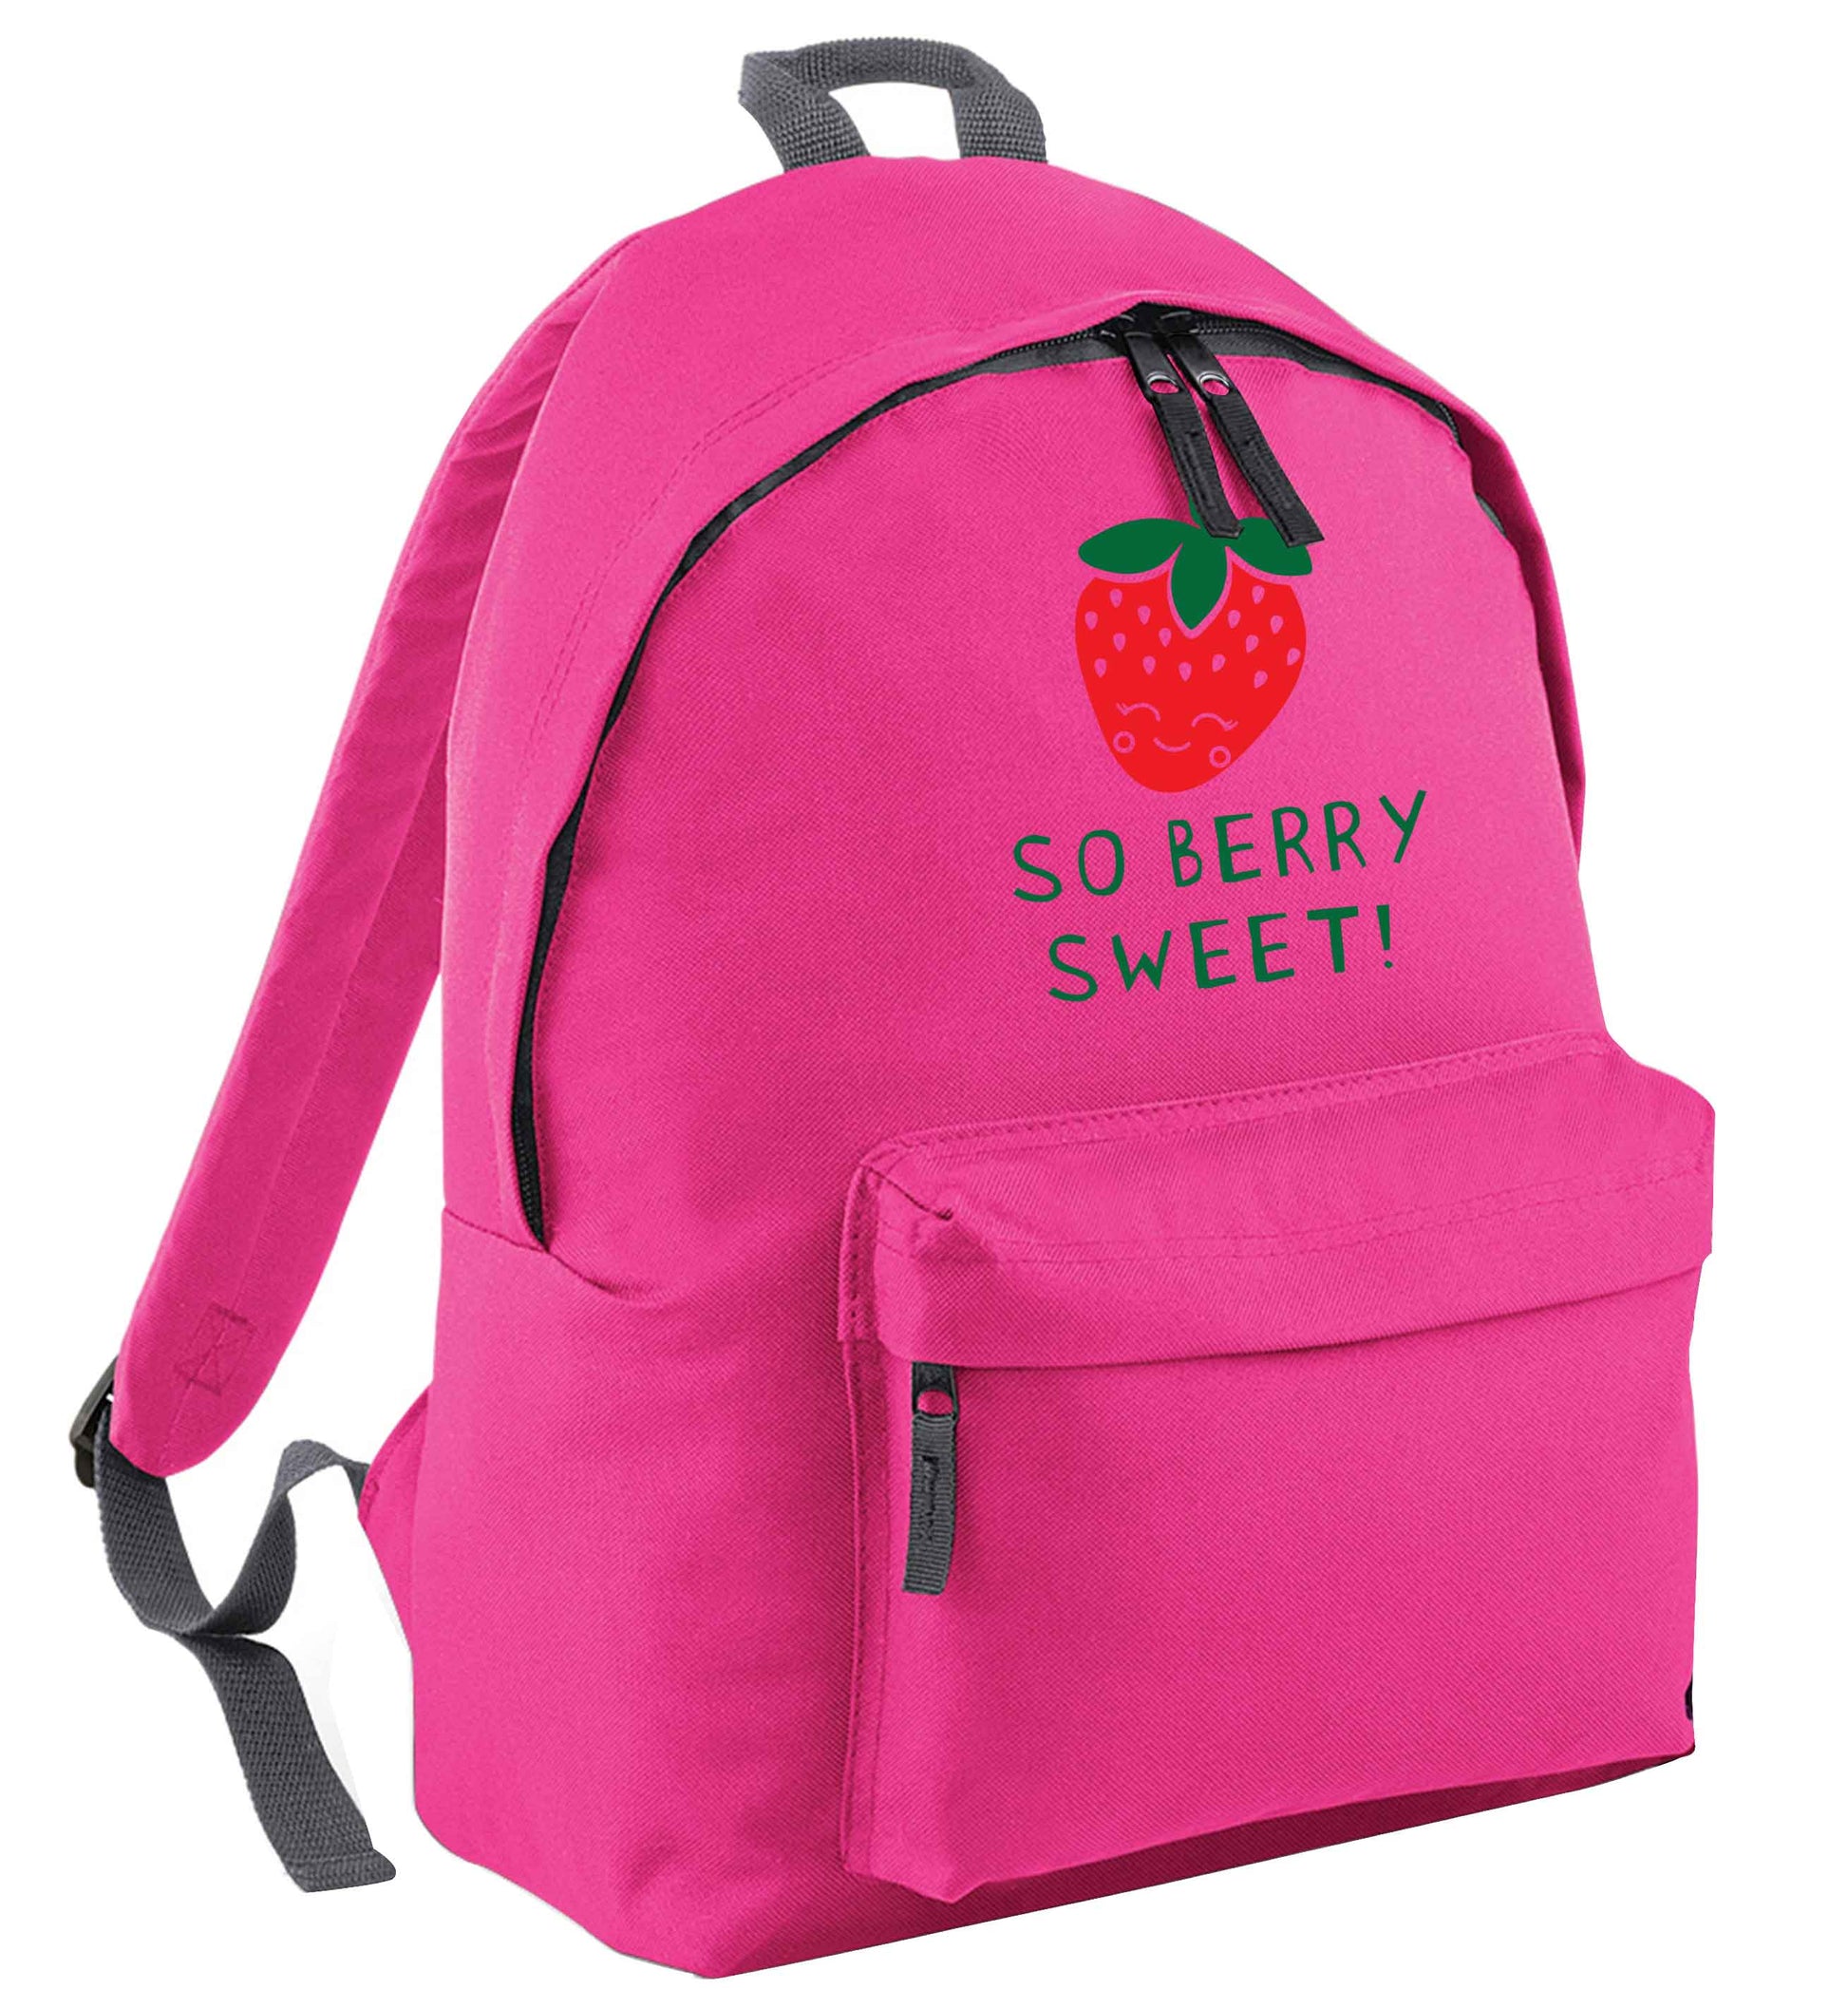 So berry sweet pink adults backpack